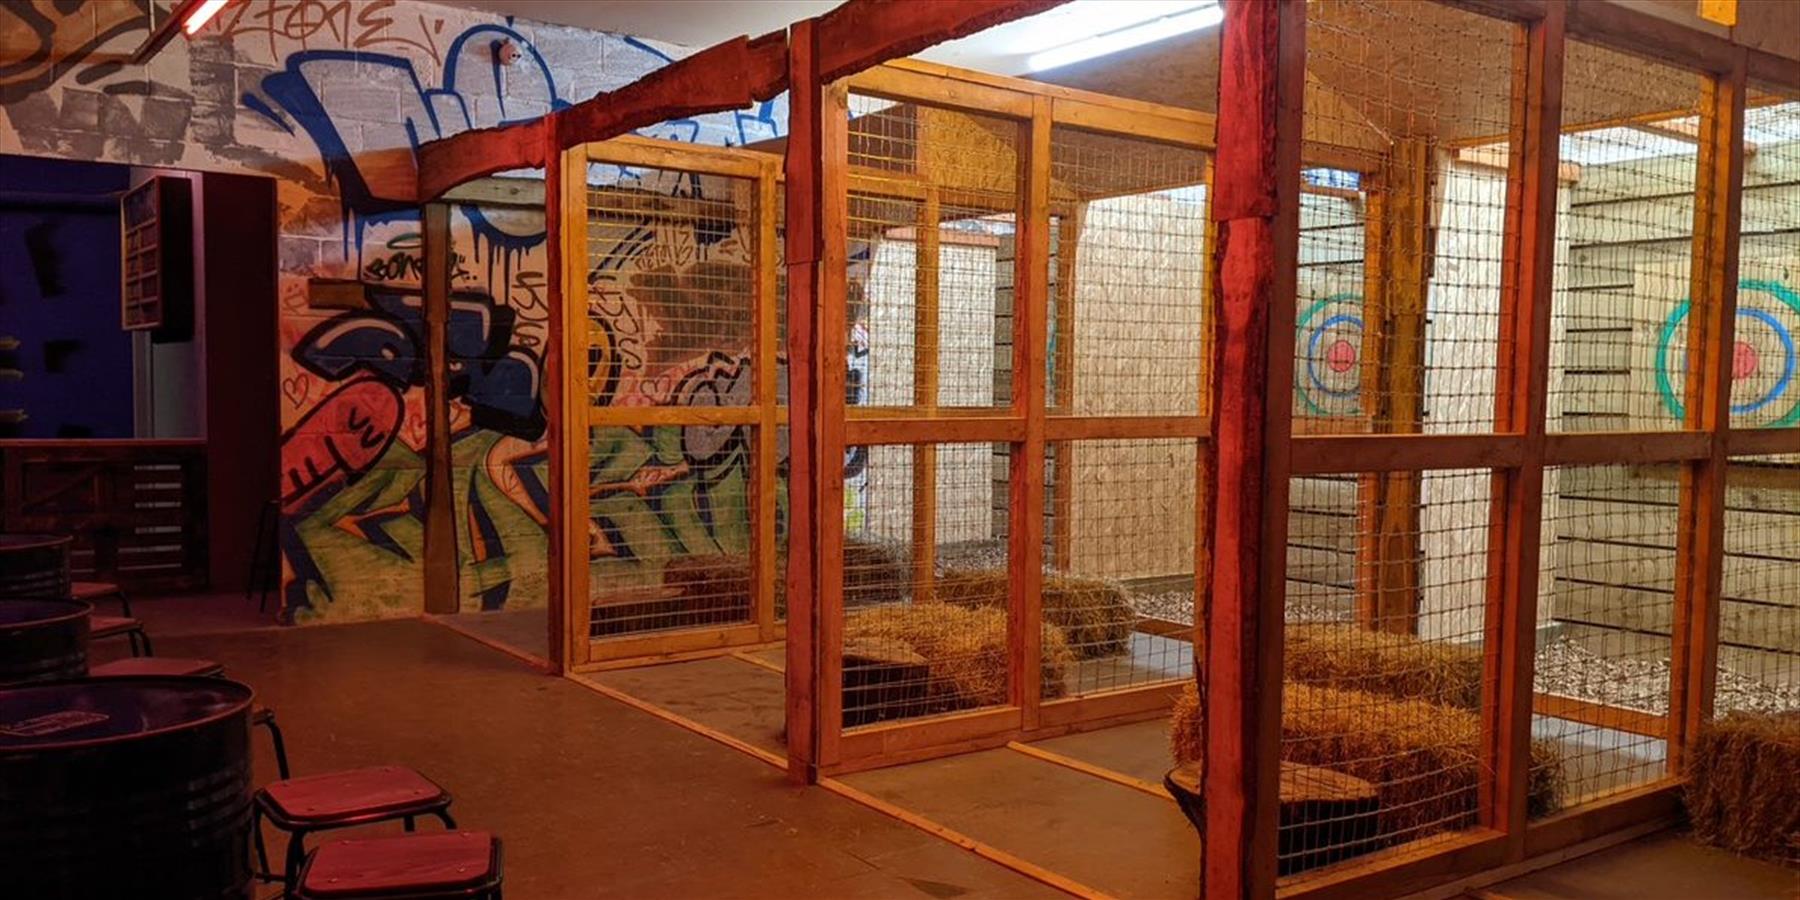 Axe throwing targets in cages